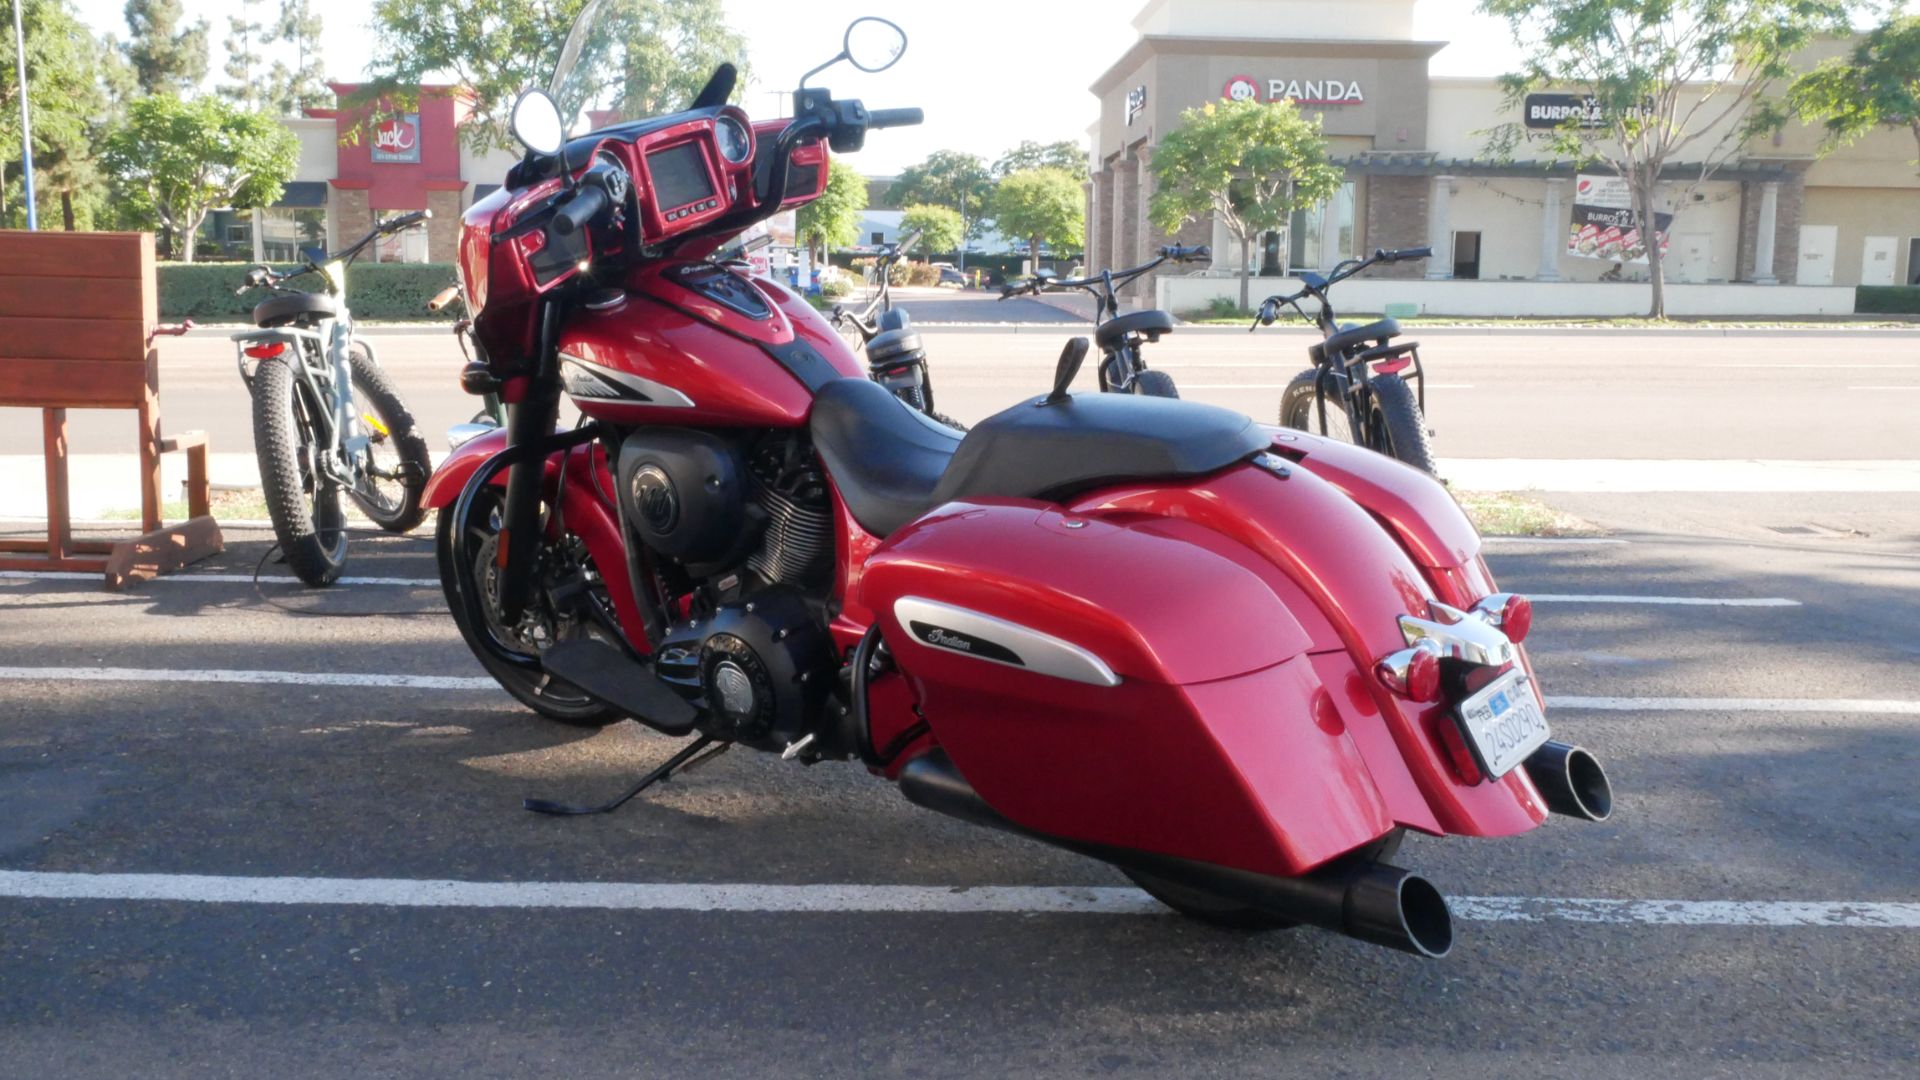 2019 Indian Motorcycle Chieftain® Dark Horse® ABS in San Diego, California - Photo 5